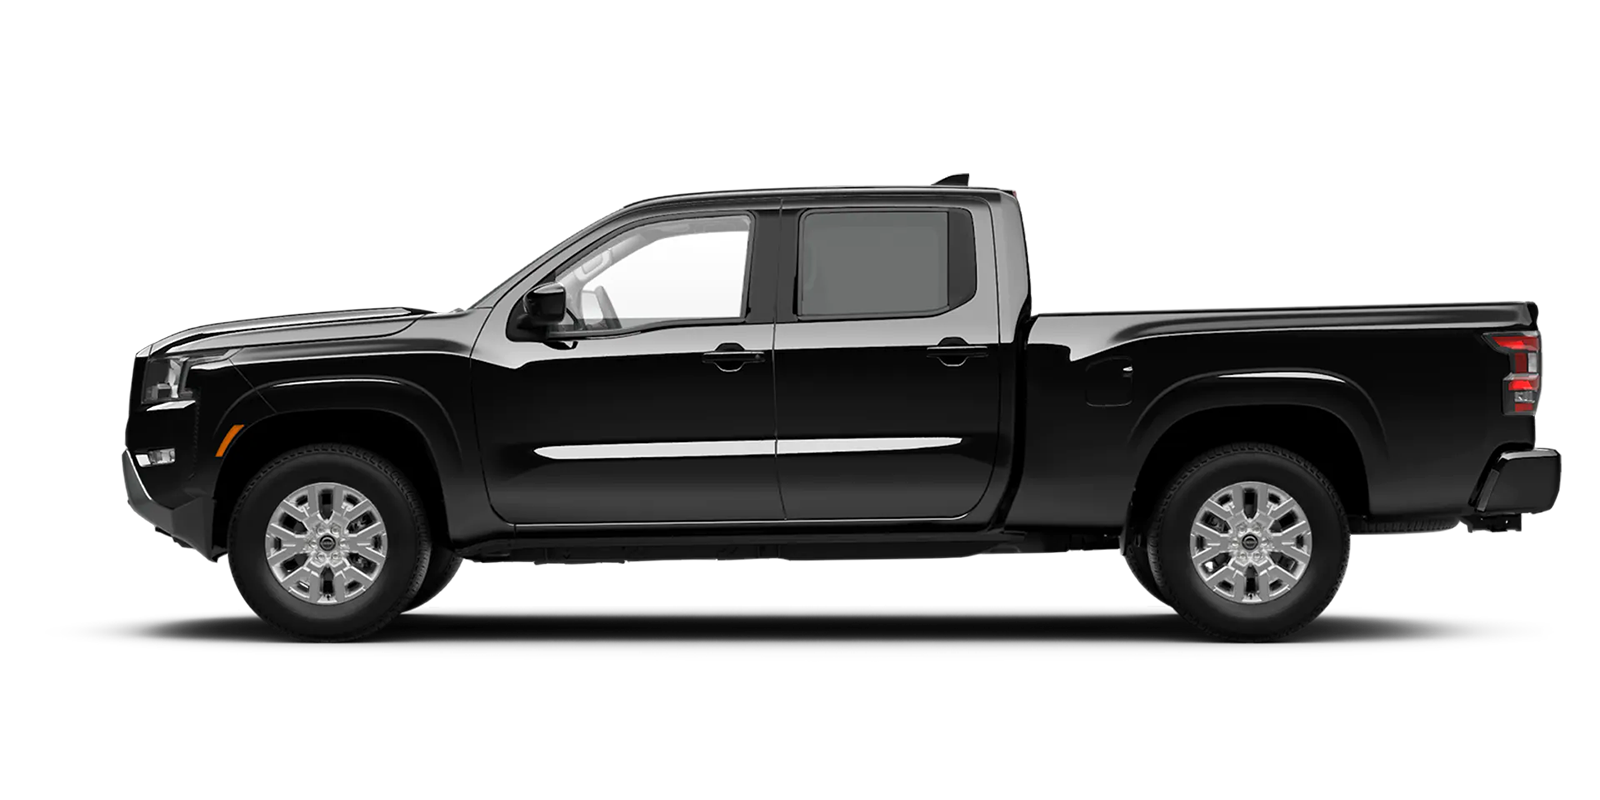 2022 Frontier Crew Cab Long Bed SV 4x4 in Super Black | San Leandro Nissan in San Leandro CA